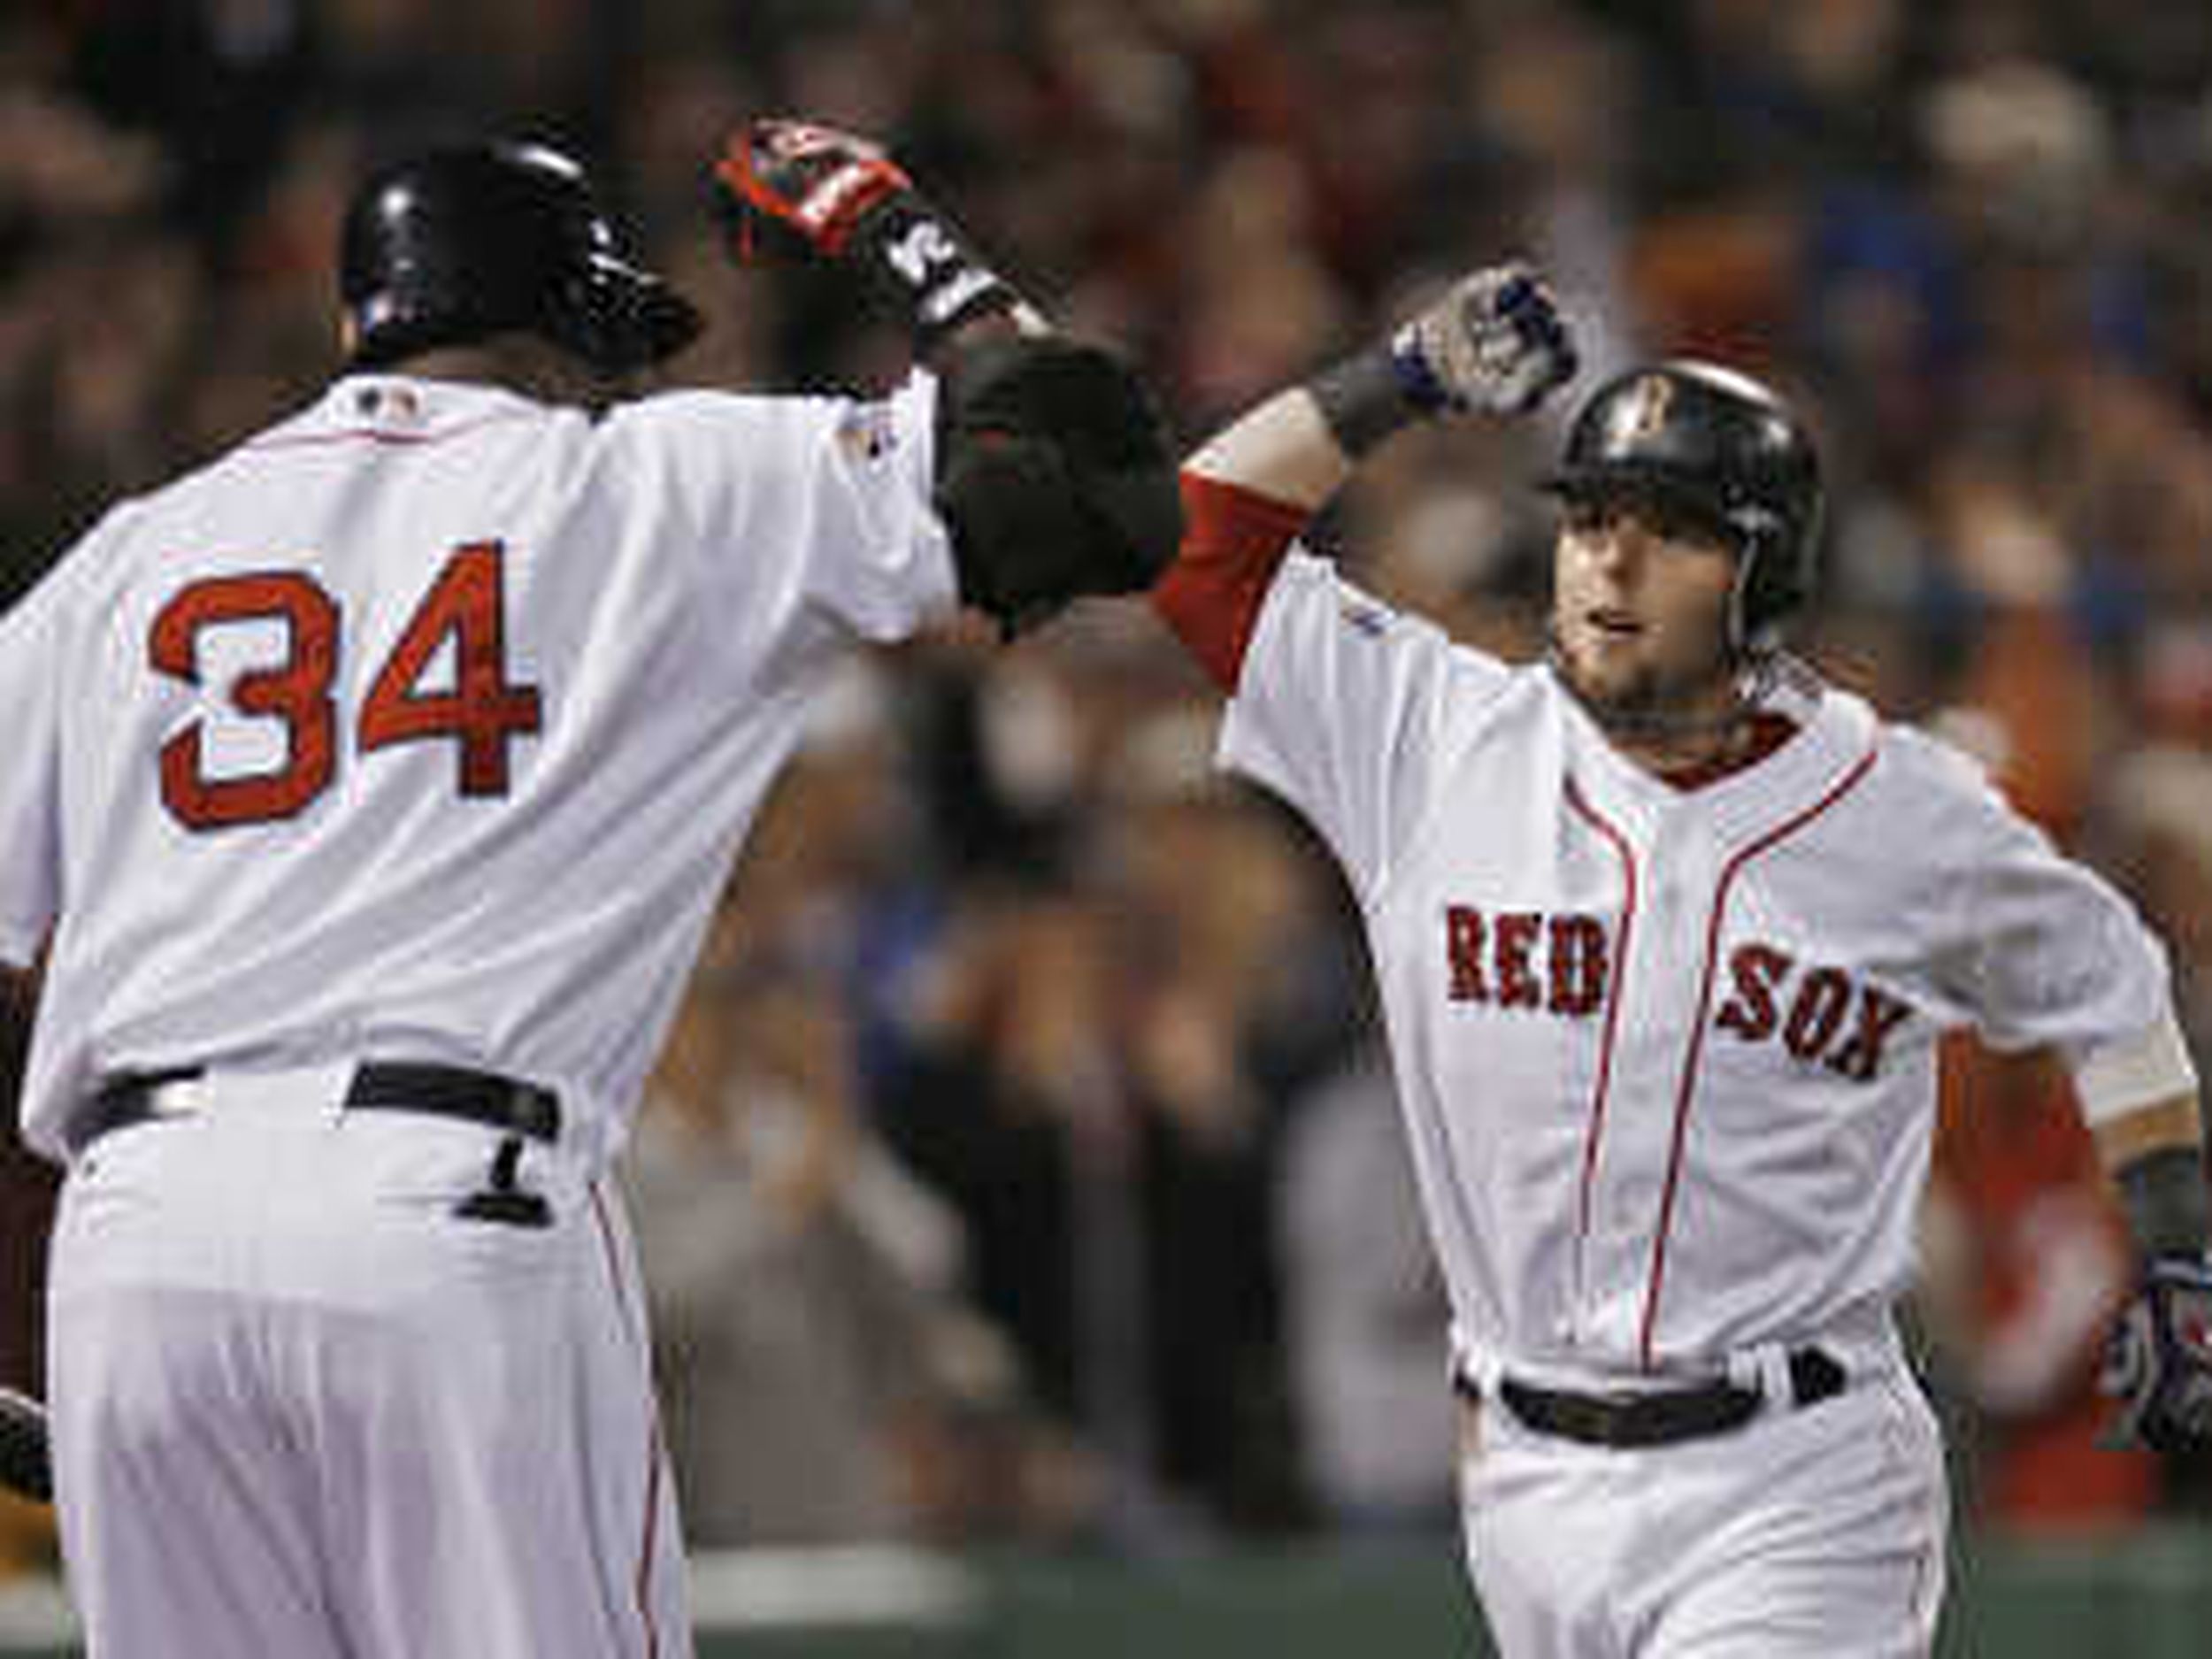 RED SOX PREVIEW: Dustin Pedroia has the heart of a giant